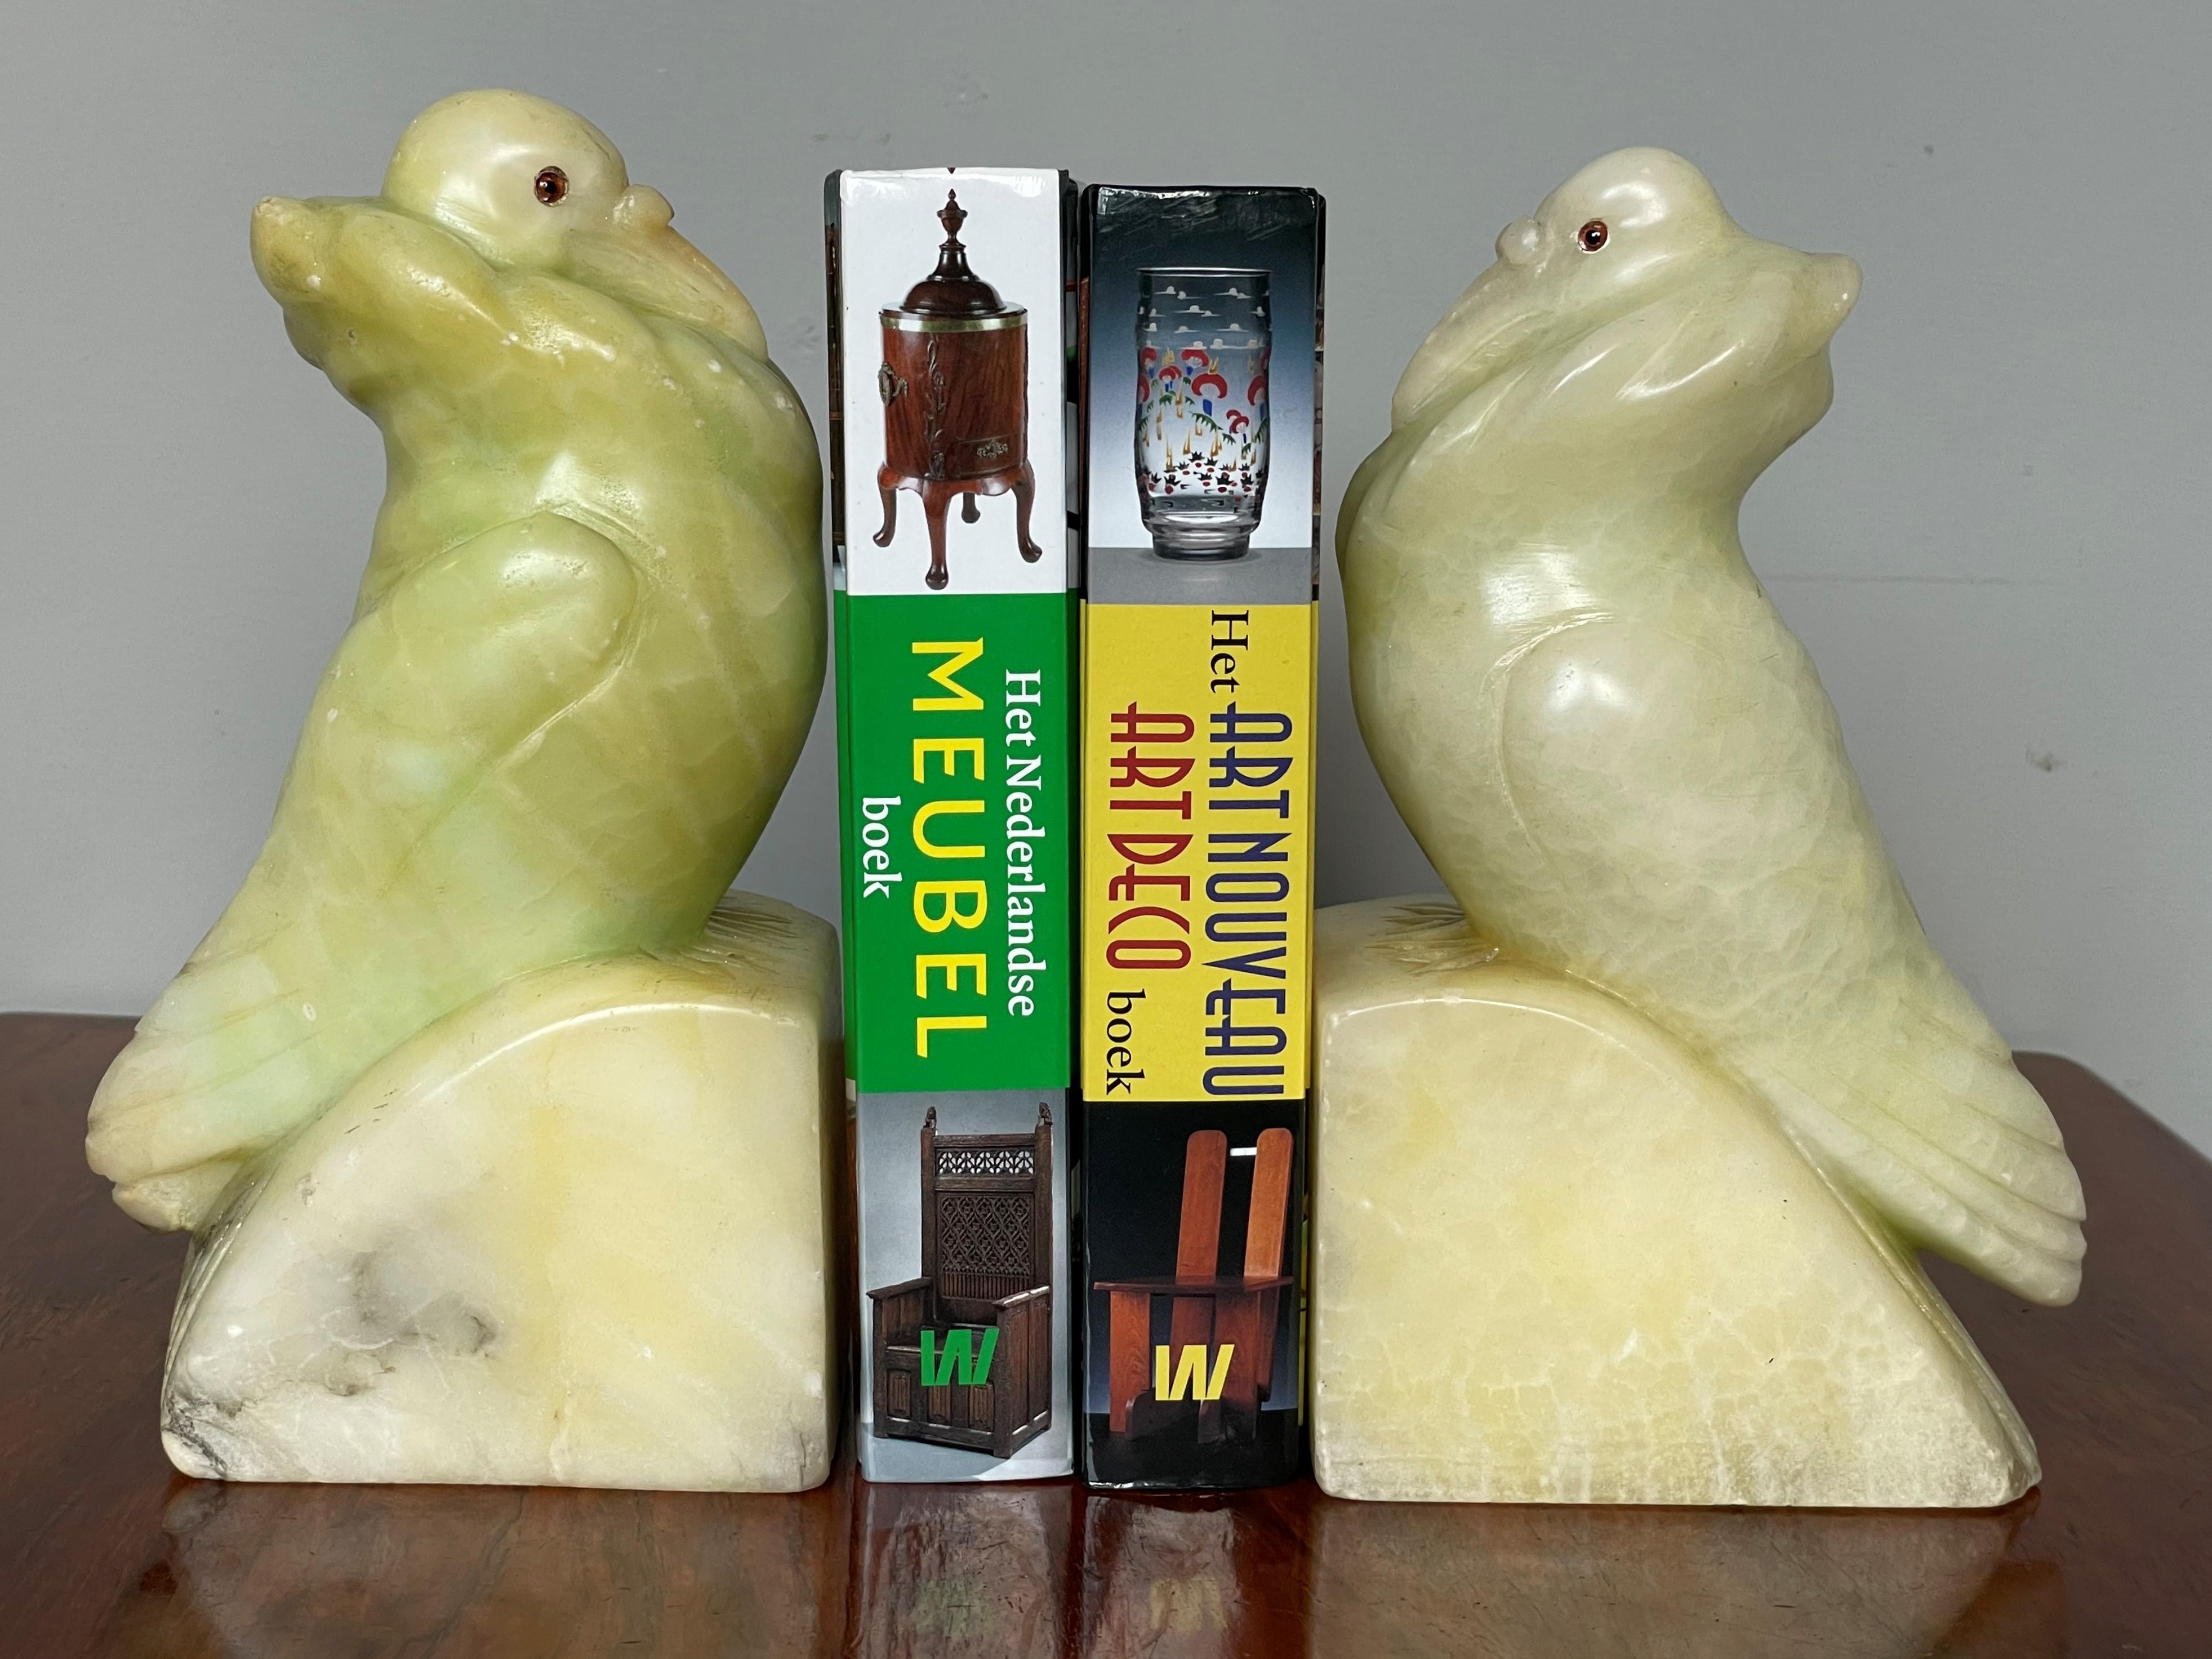 Unique pair of antique bookends in a rare color alabaster.

If you are looking for decorative, practical, very well handcrafted and meaningful bookends then this pair could be perfect for you. Birds in general often are vibrant and beautiful